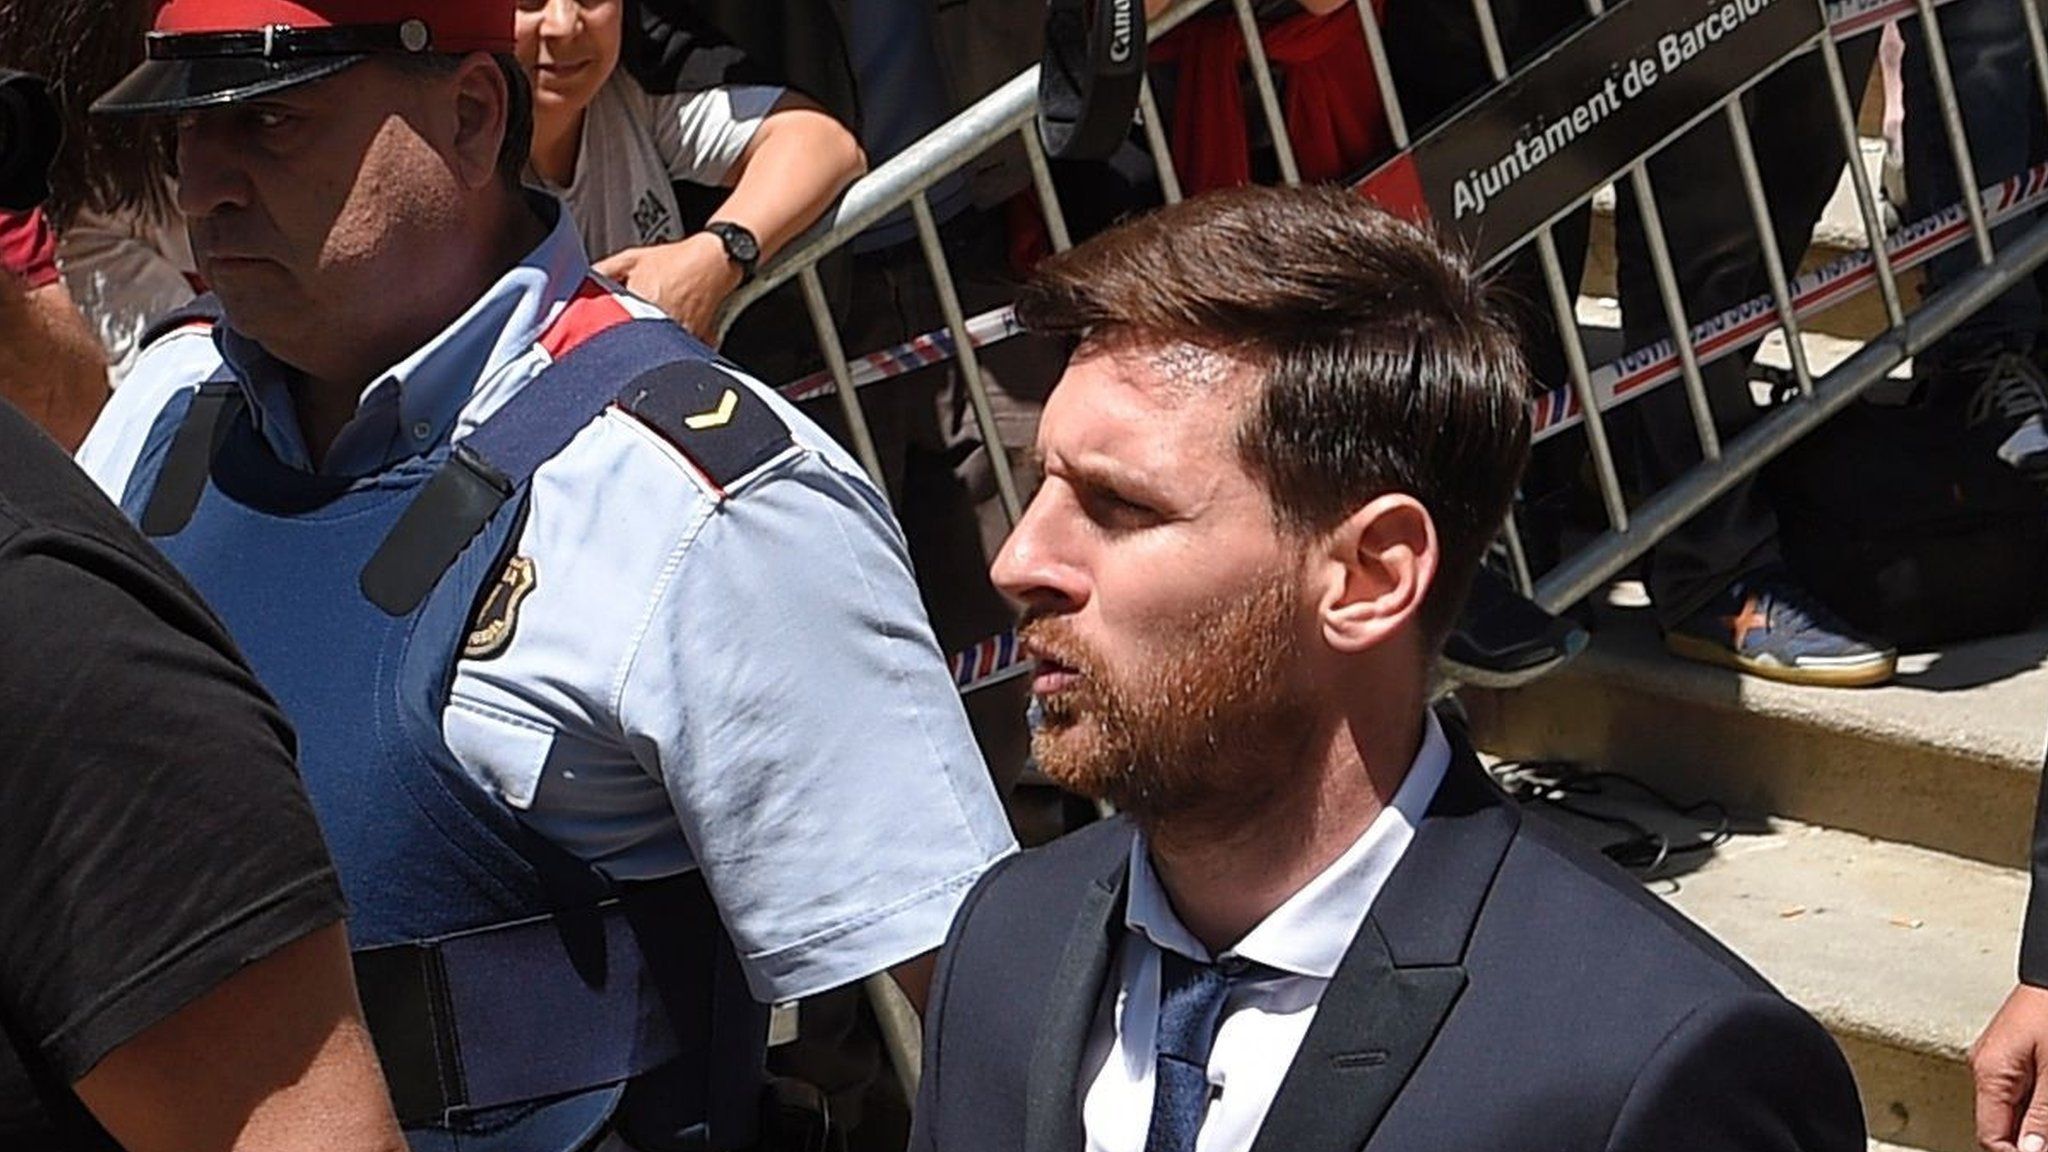 Barcelona football star Lionel Messi leaves the courthouse in Barcelona on 2 June 2016